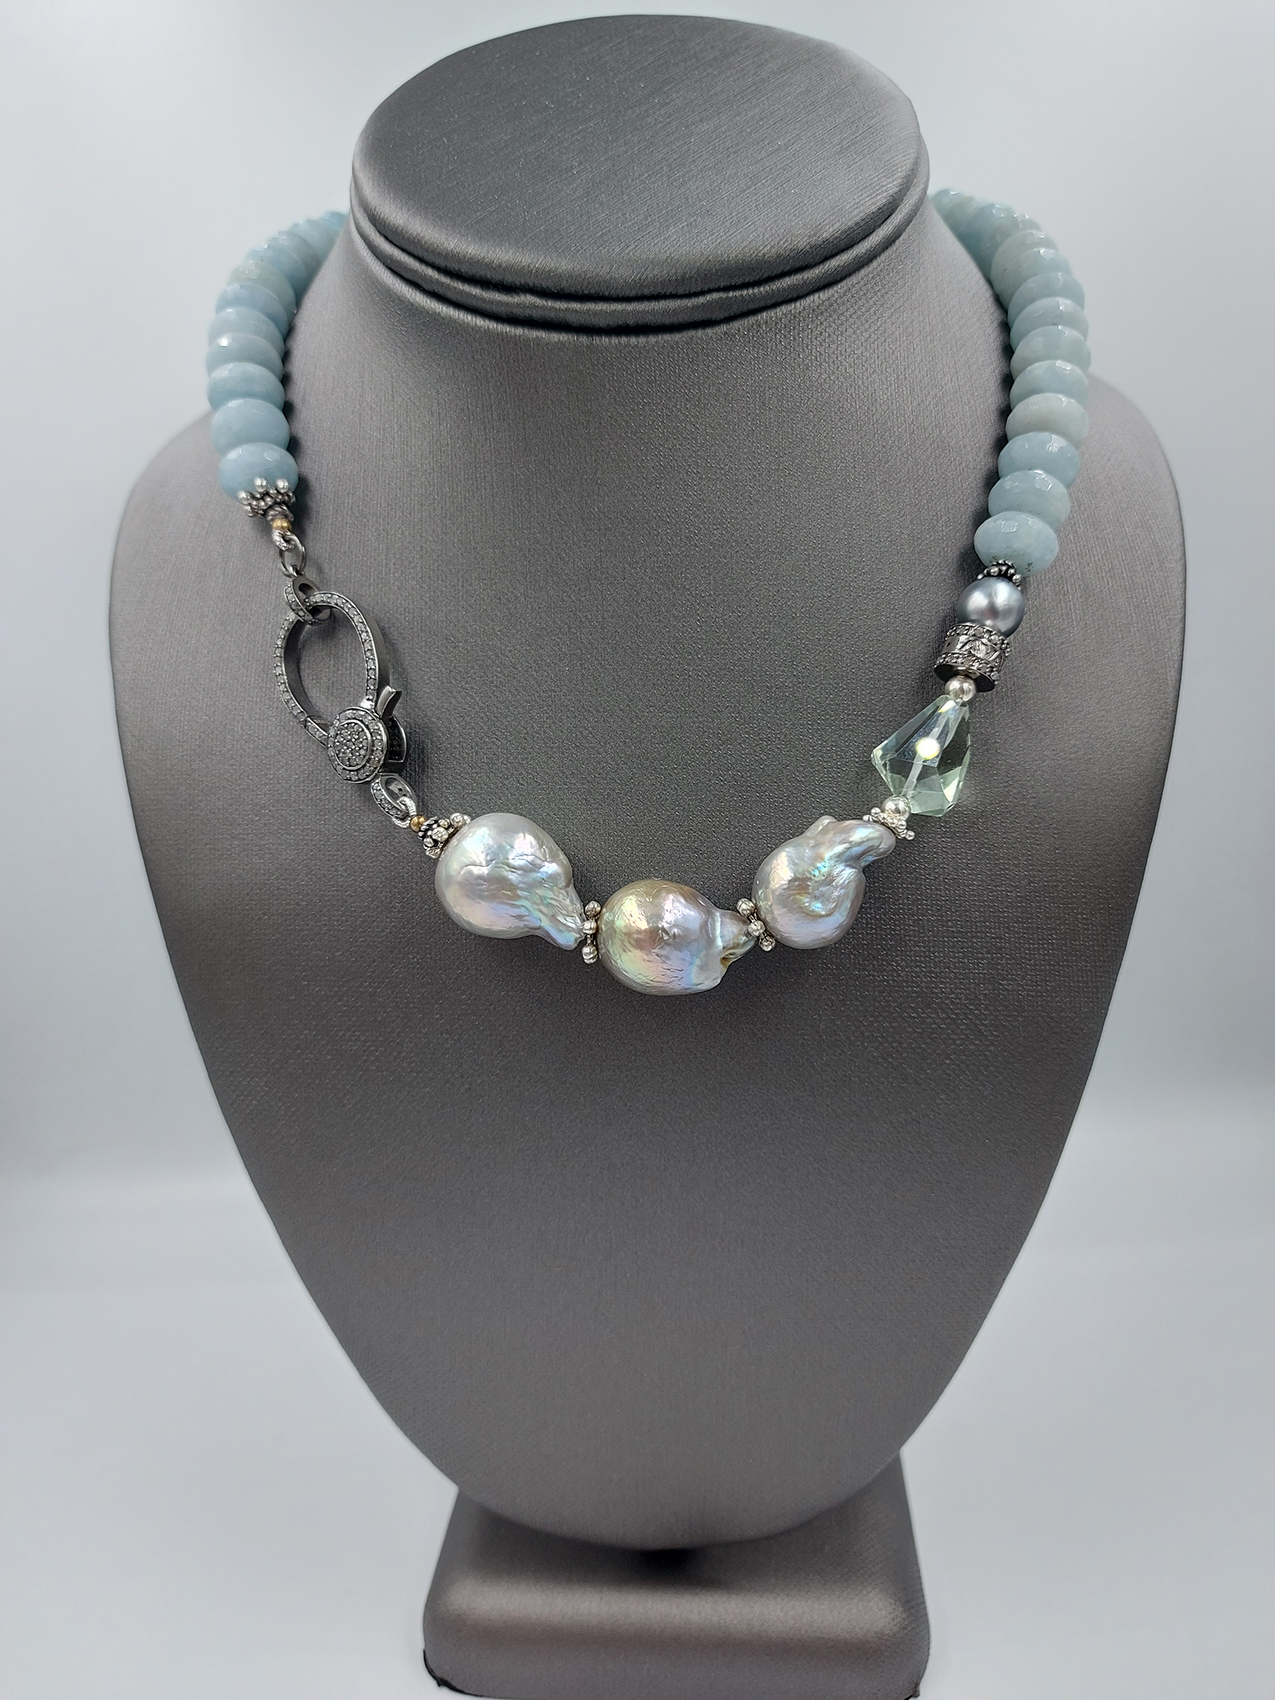 Aquamarine gem and pearl necklace in Chennai at best price by Sri Kubera  Sudharsan Jewel Works - Justdial